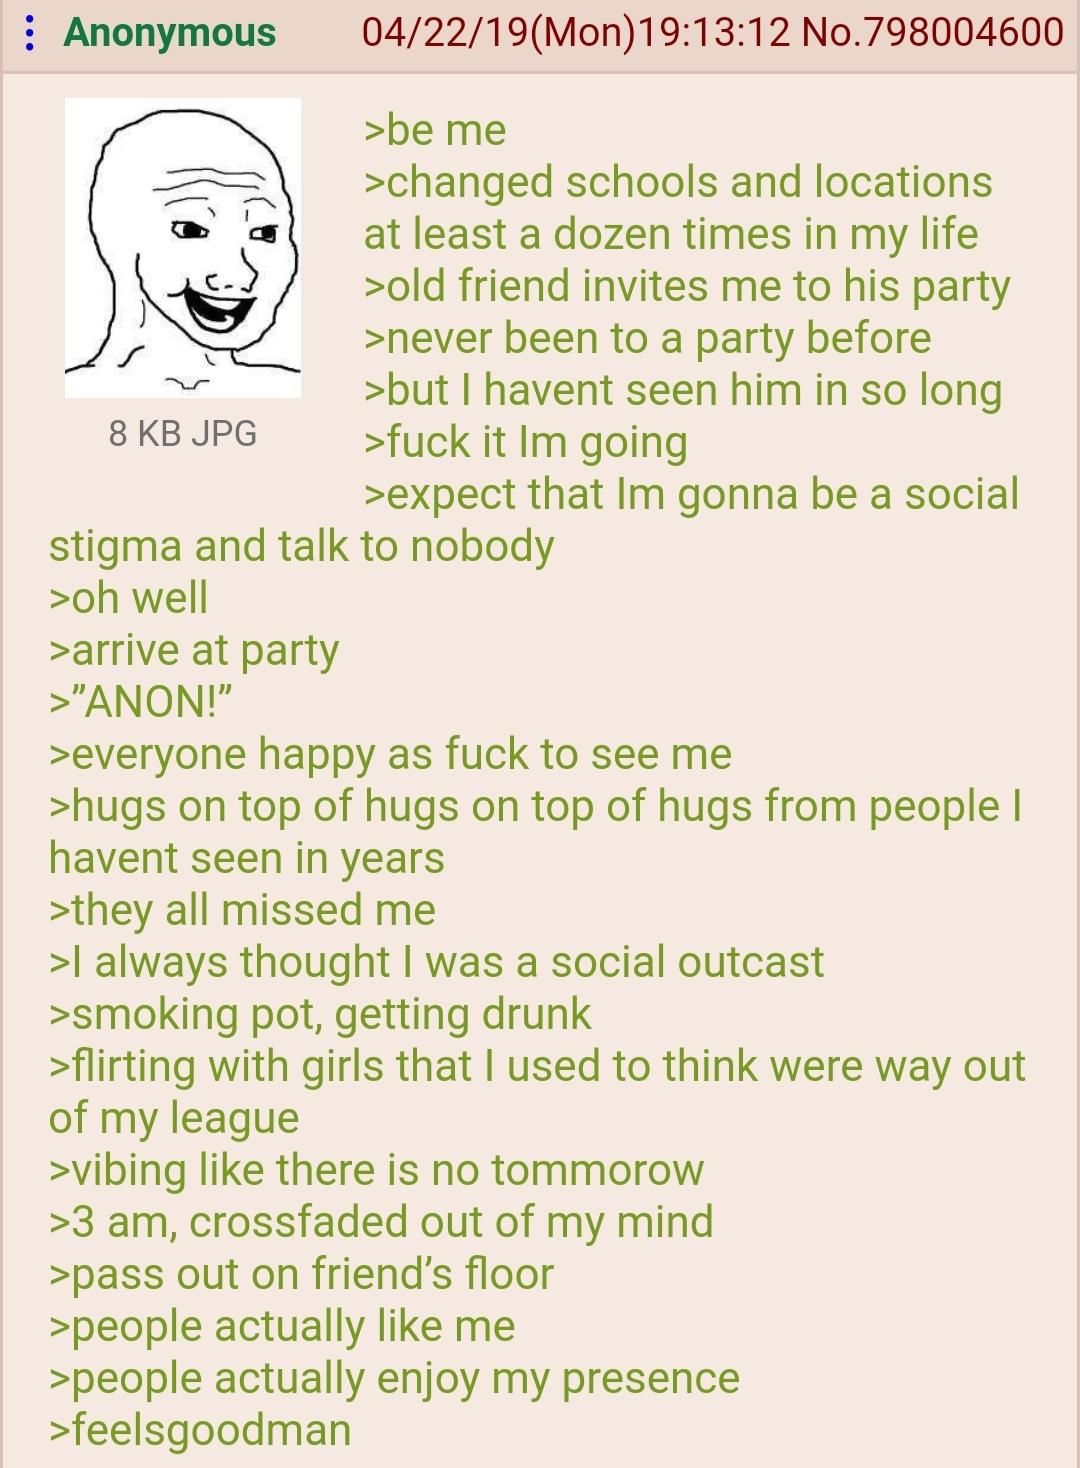 Anon at a party